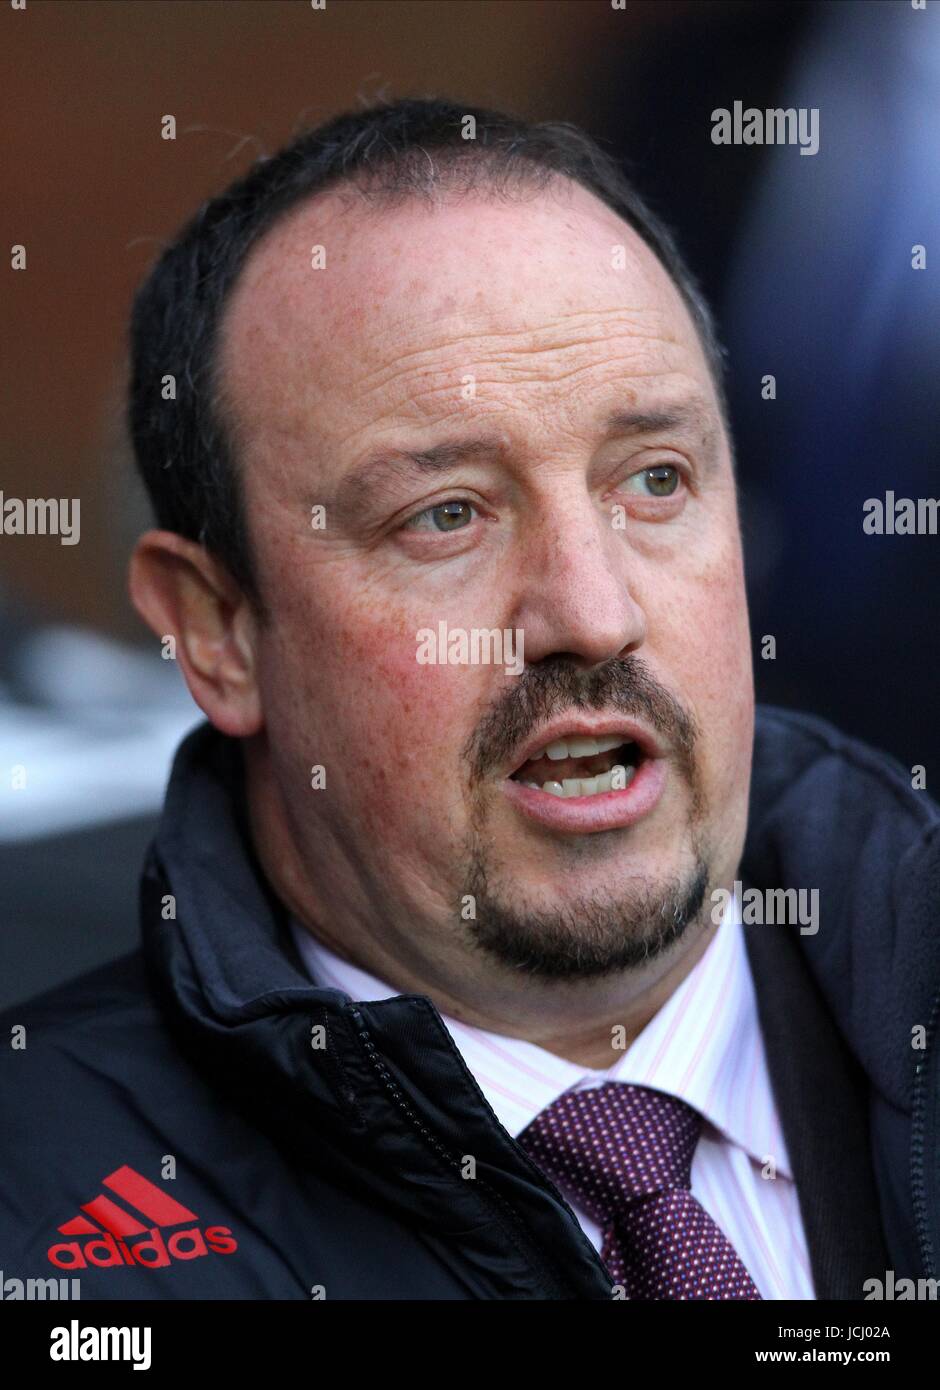 RAFA BENITEZ LIVERPOOL FC MANAGER BLACKBURN ROVERS V LIVERPOOL,BARCLAYS PREMIERSHIP EWOOD PARK, BLACKBURN, ENGLAND 05 December 2009 GAB5715     WARNING! This Photograph May Only Be Used For Newspaper And/Or Magazine Editorial Purposes. May Not Be Used For, Internet/Online Usage Nor For Publications Involving 1 player, 1 Club Or 1 Competition, Without Written Authorisation From Football DataCo Ltd. For Any Queries, Please Contact Football DataCo Ltd on +44 (0) 207 864 9121 Stock Photo